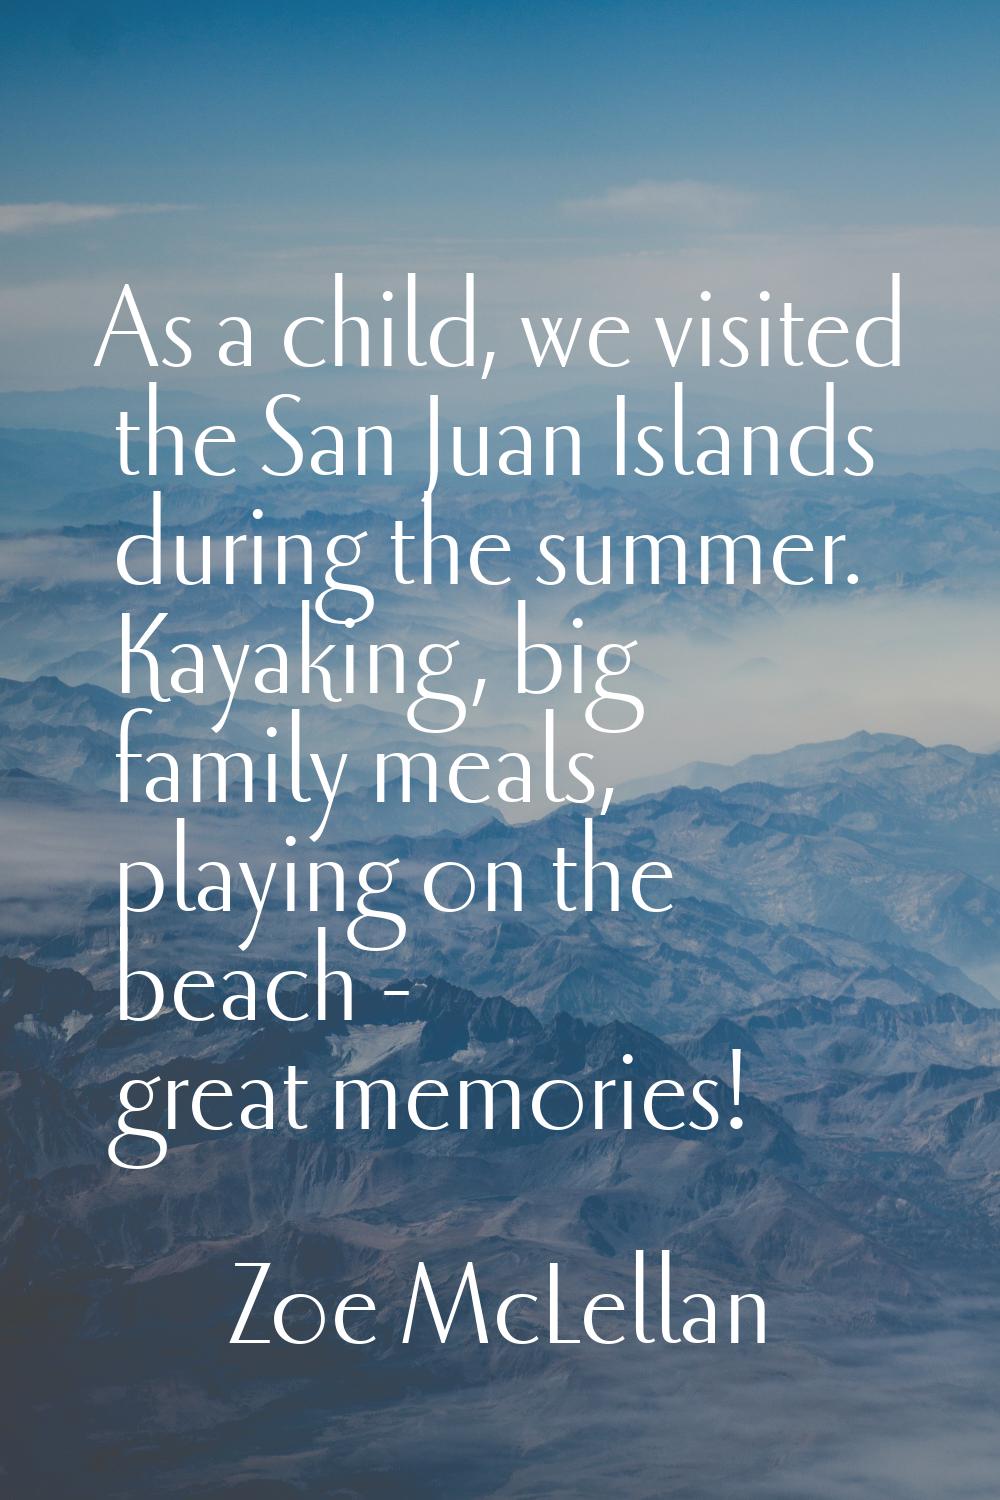 As a child, we visited the San Juan Islands during the summer. Kayaking, big family meals, playing 